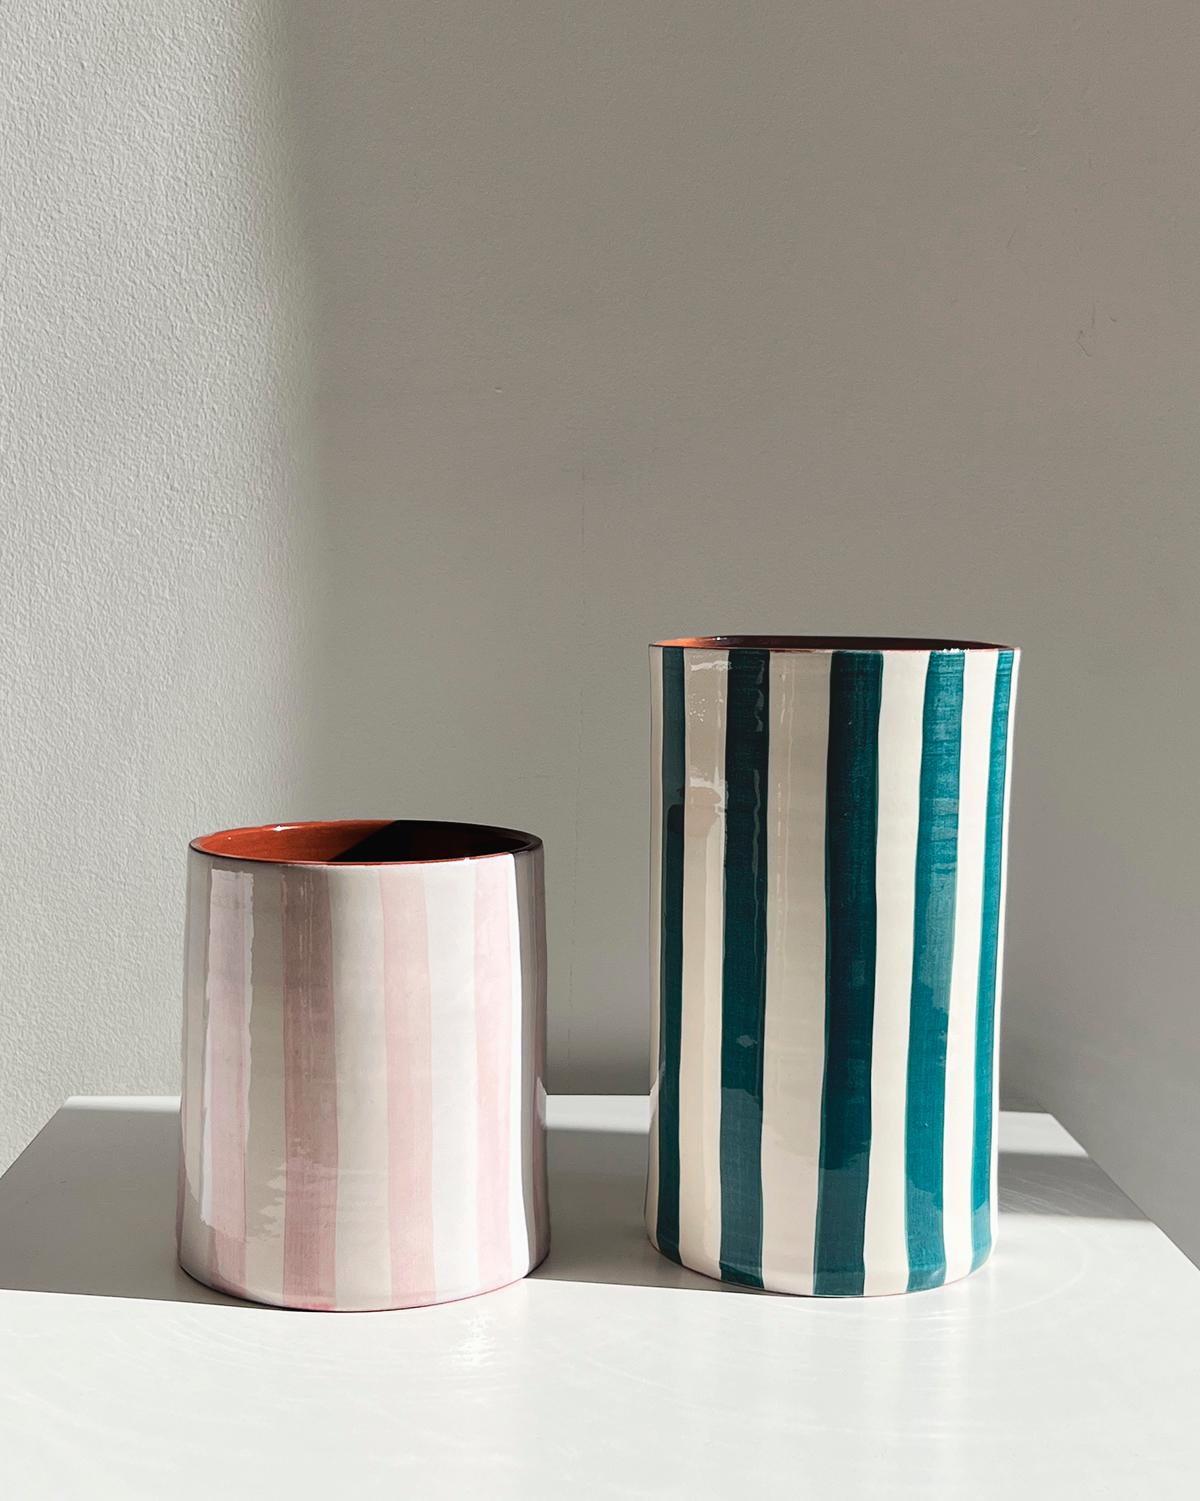 A unique vase for to beautify your home. This Casa Cubista vase is an artisanal piece of home decor made from terracotta with bold, black and white stripes. Handcrafted in Europe, this fair trade and locally-sourced vase is the perfect addition to